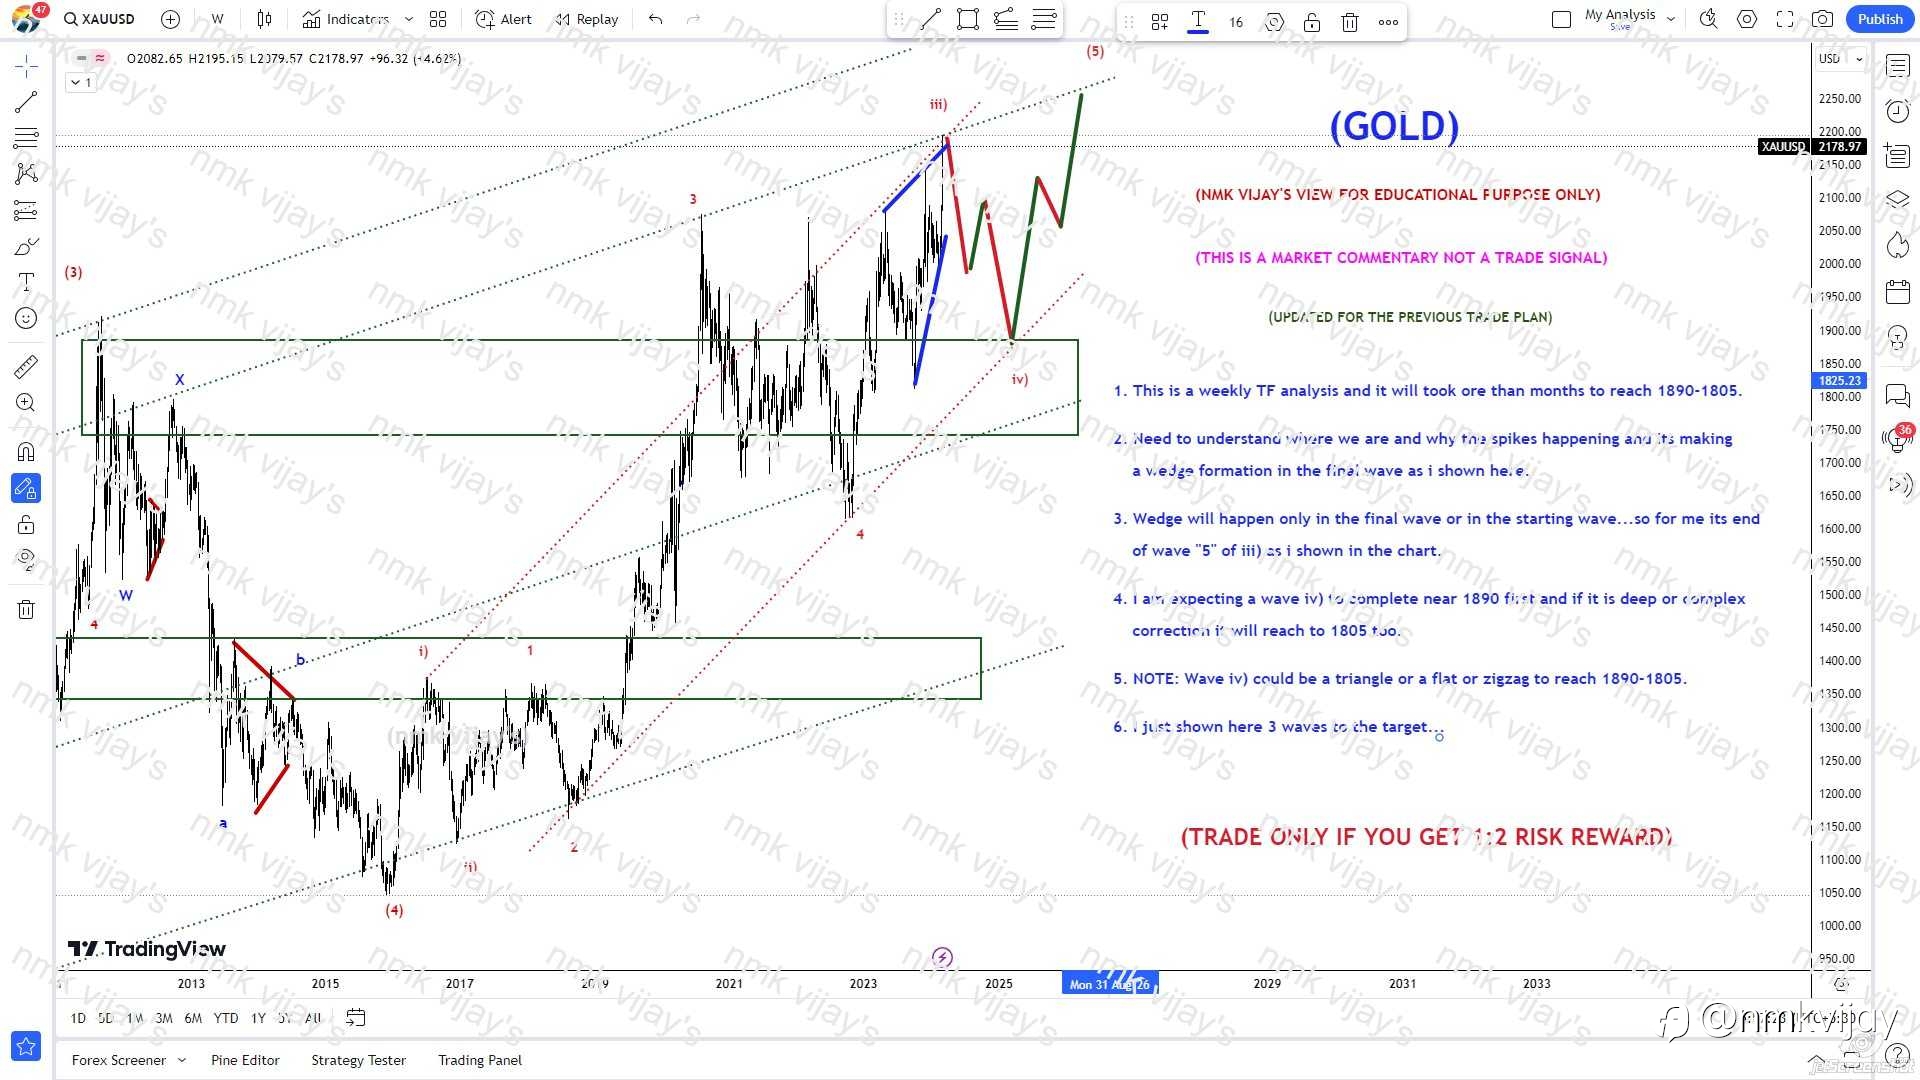 GOLD: Will reach 1890-1805 for wave iv) later 2250 for v) of (5)